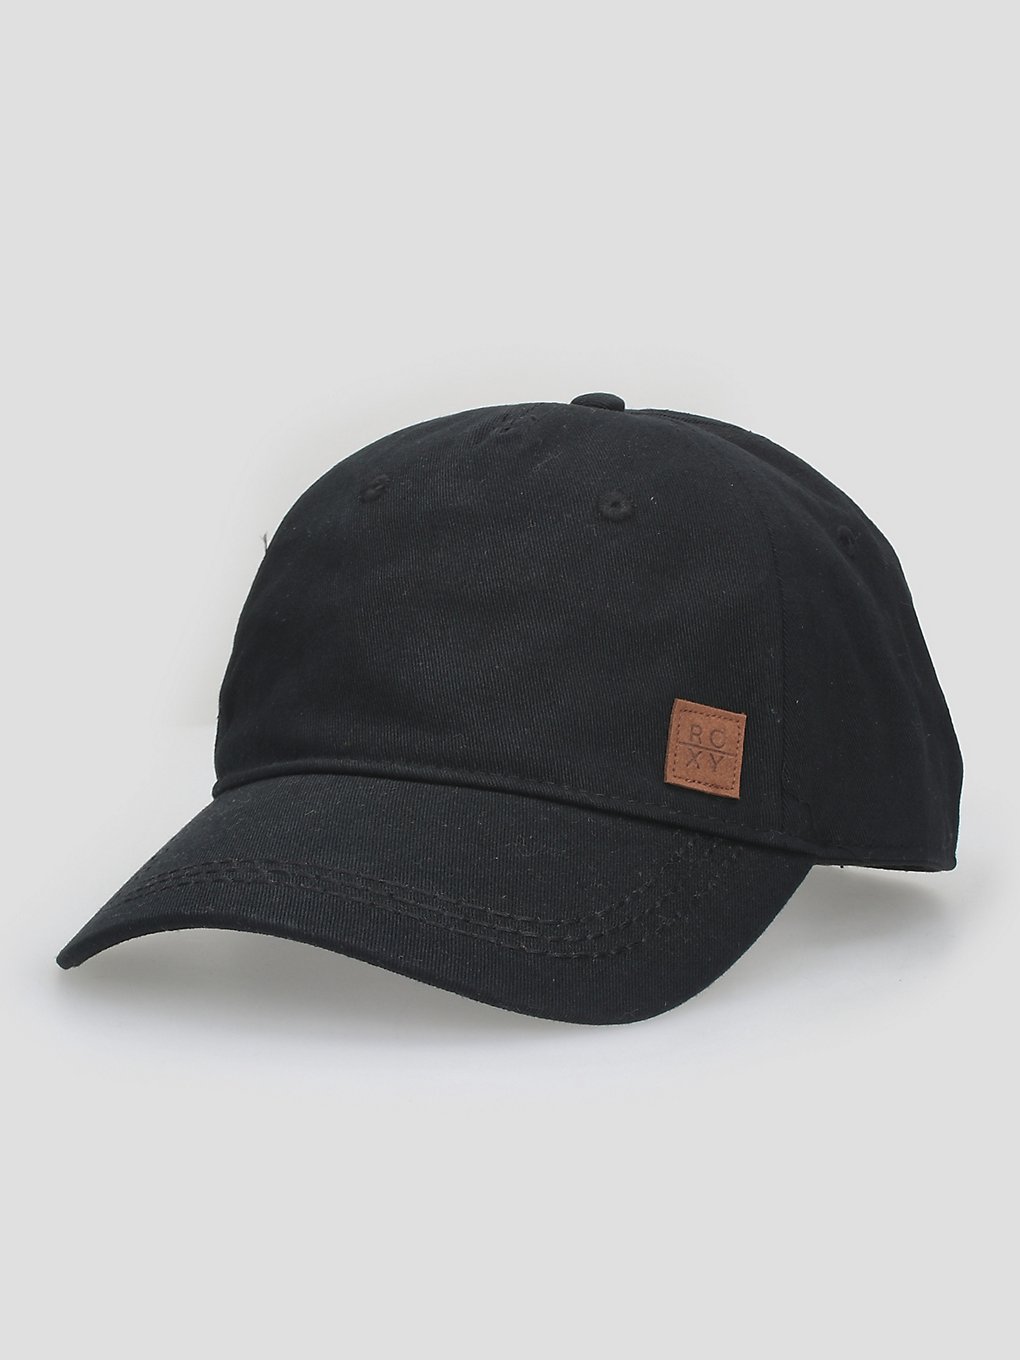 Roxy Extra Innings A Cap anthracite kaufen